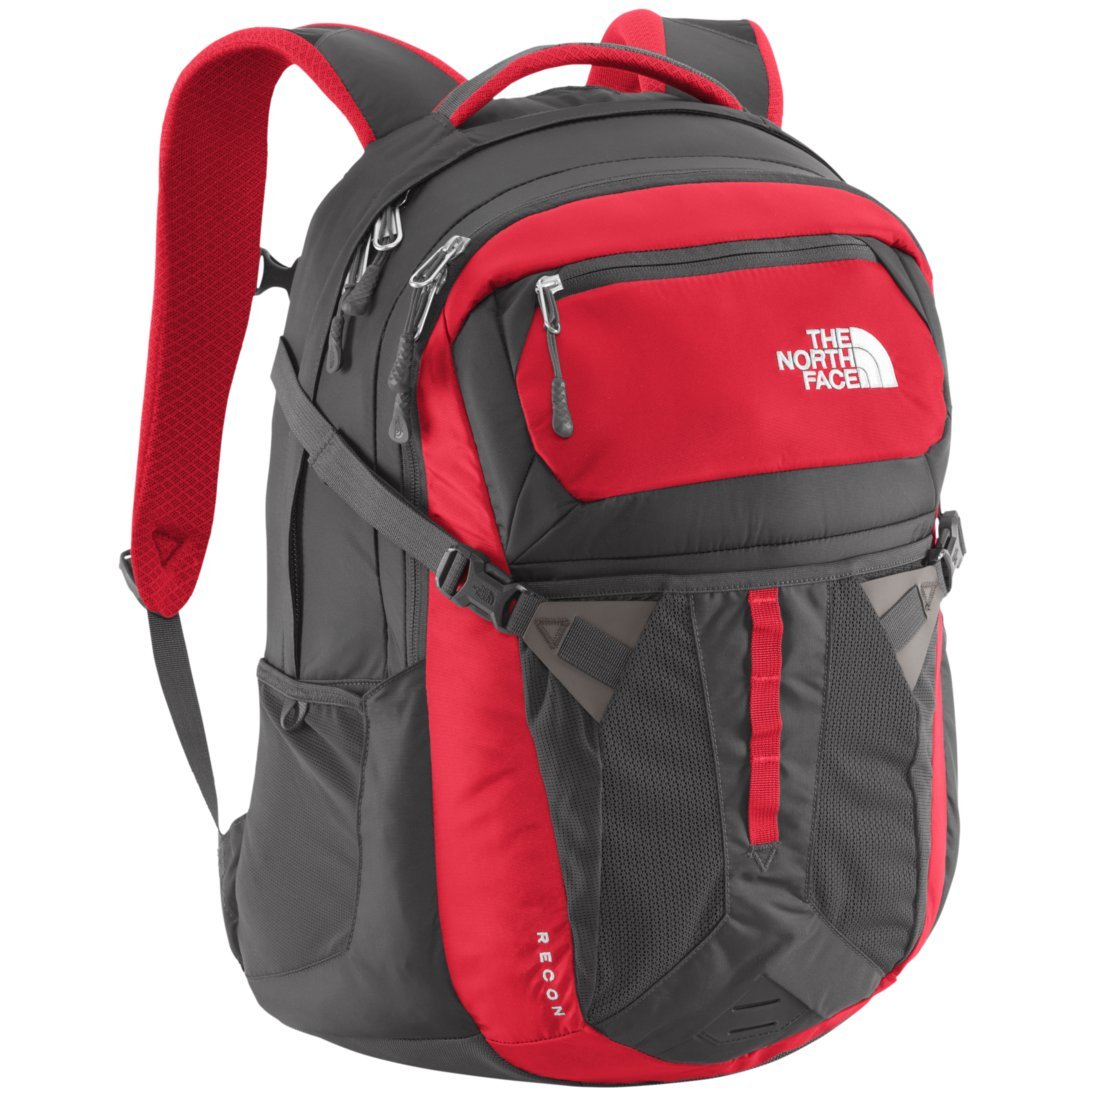 The North Face bags. THE NORTH FACE Berkeley Crossbody Bag, TNF Black